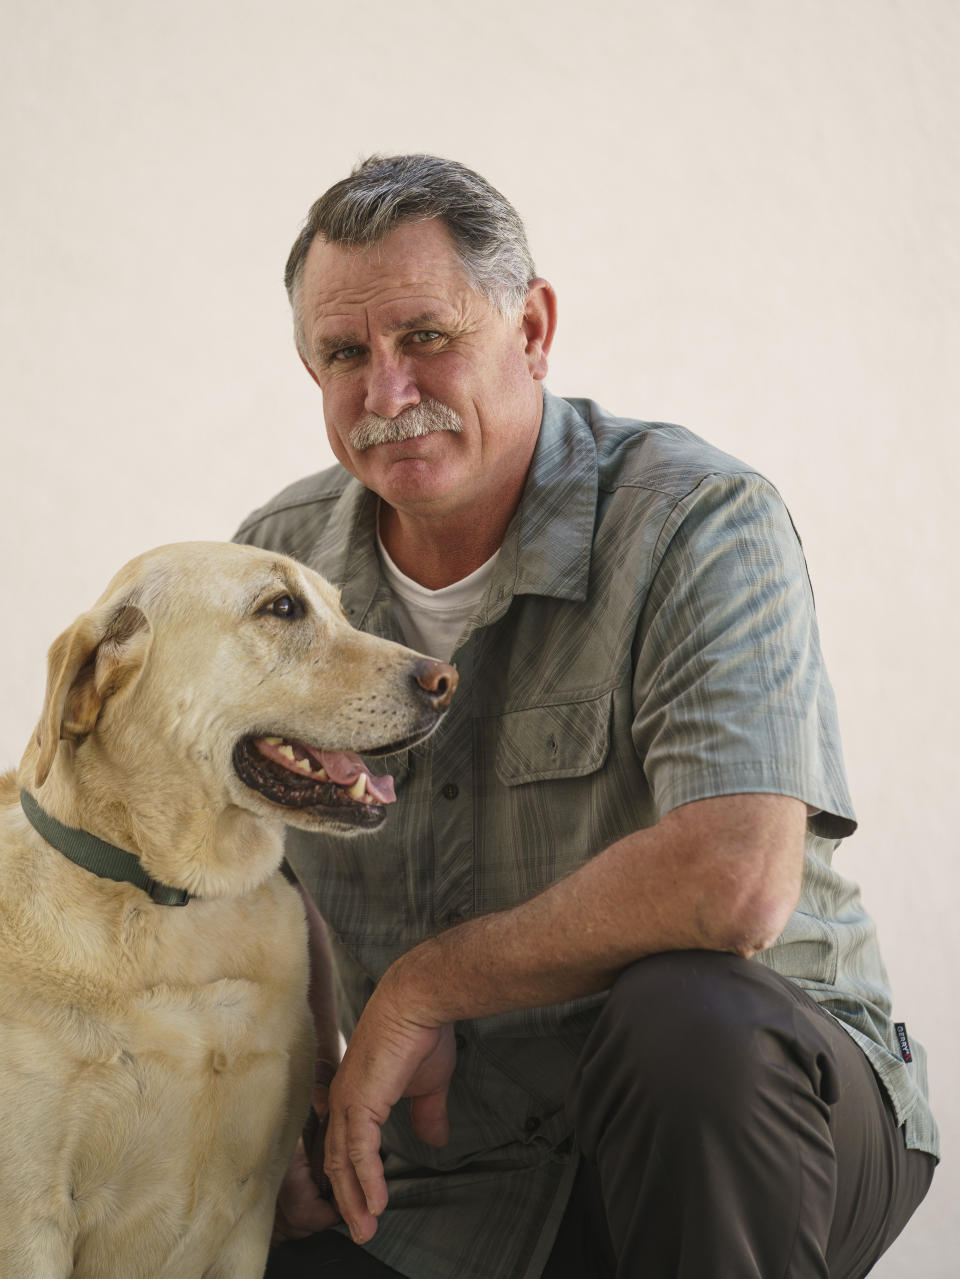 Orrin Heatlie, the main organizer for the Recall of California Gov. Newsom campaign, poses with his service dog Bailey after recording a radio program at the KABC radio station in Culver City, Calif., Saturday, March 27, 2021. (AP Photo/Damian Dovarganes)